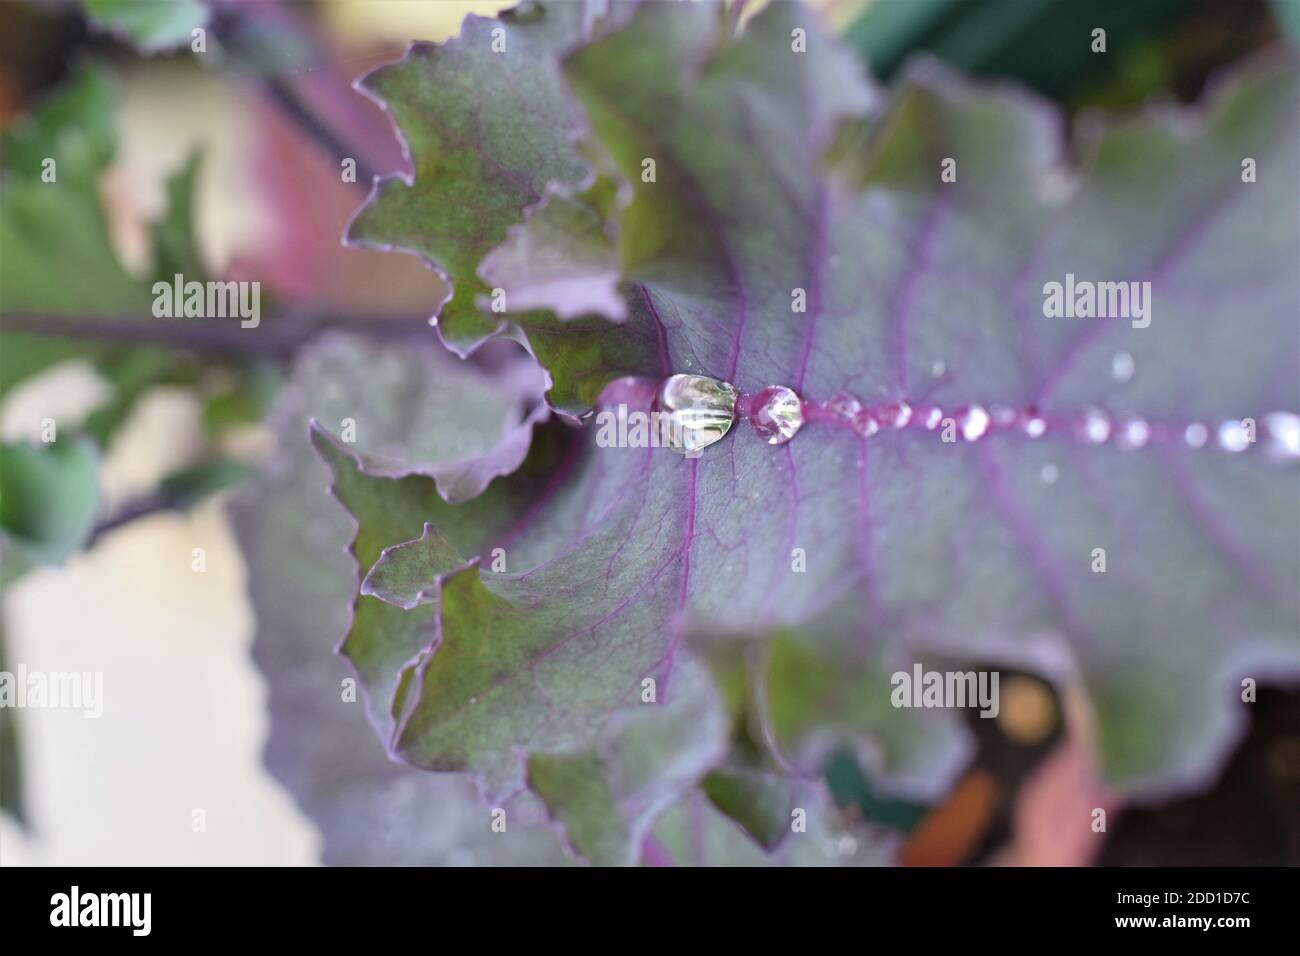 Dew drops on purple cabbage leaf as close up Stock Photo